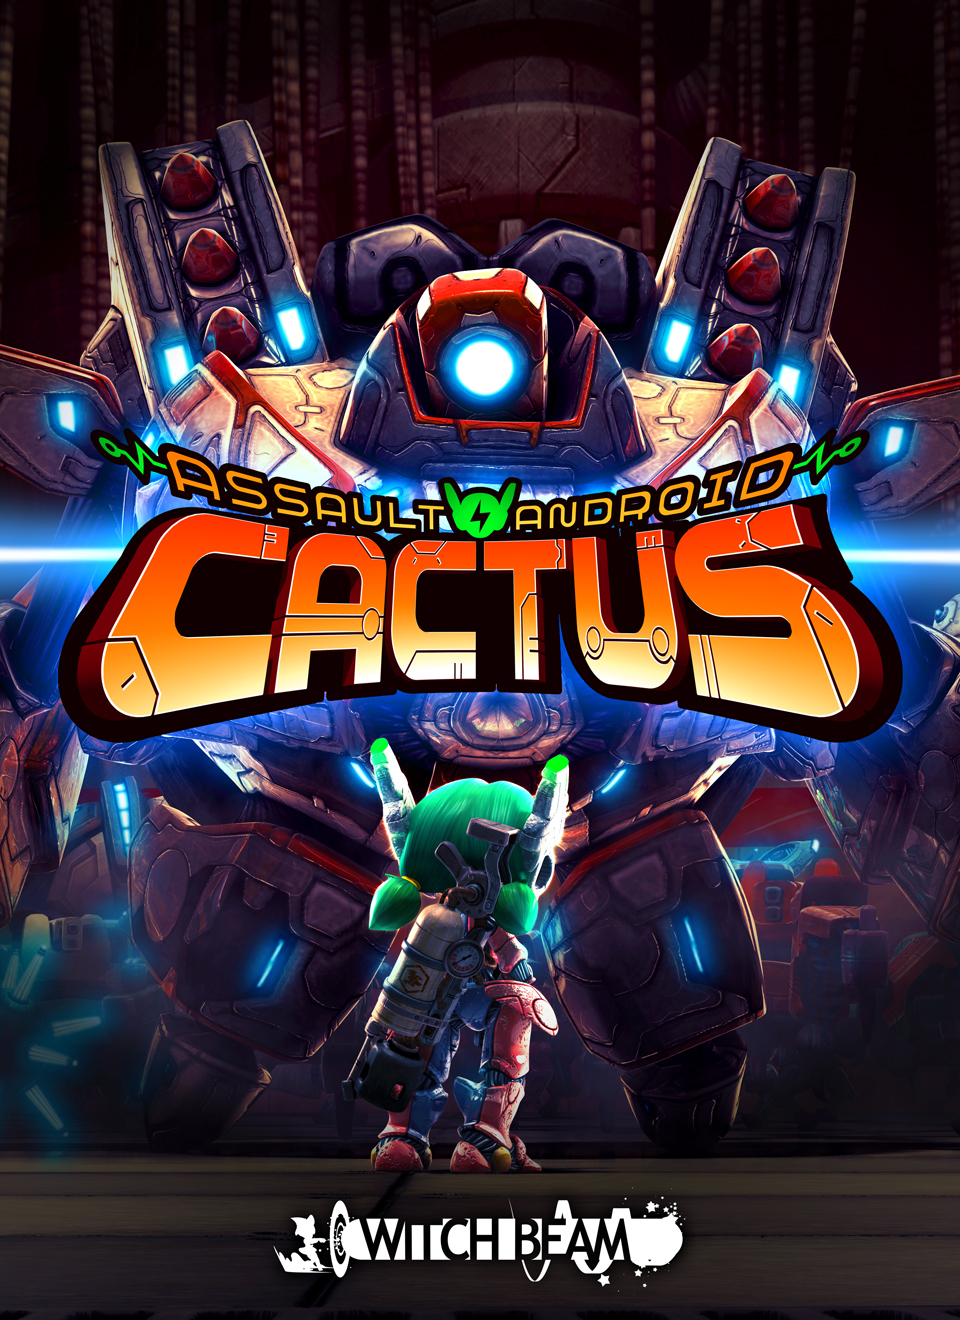 download free assault android cactus ps4